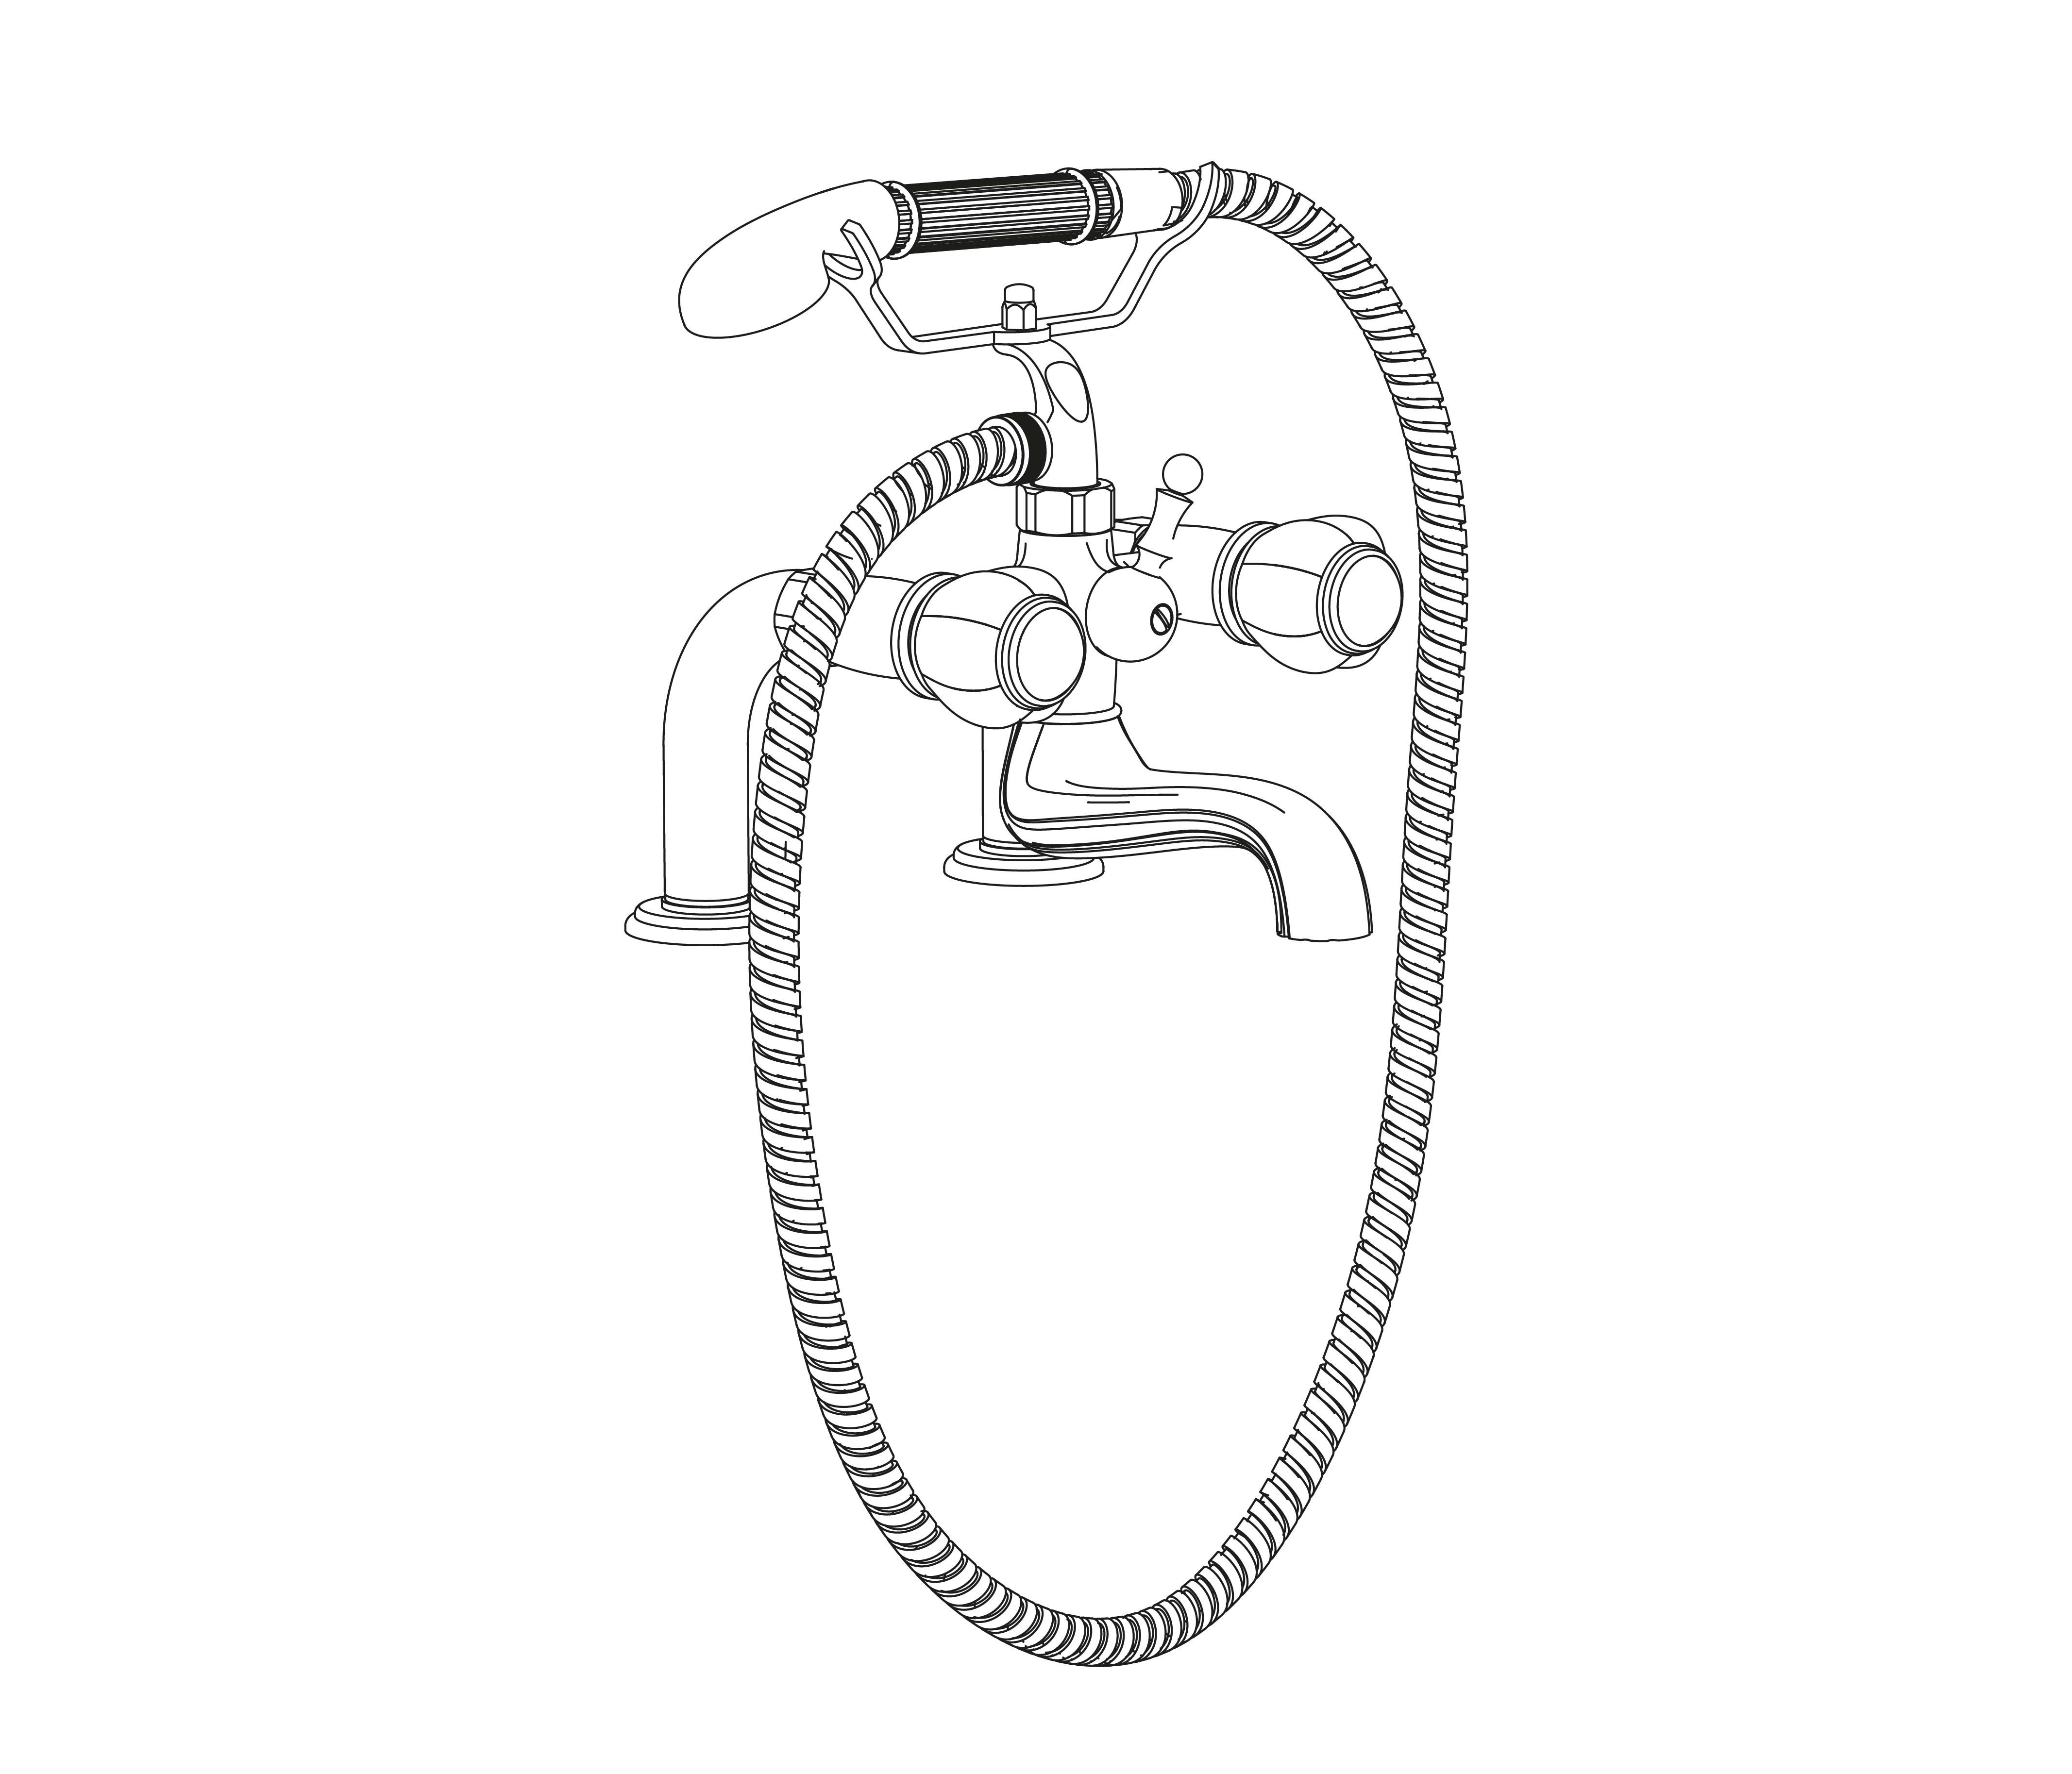 S152-3306 Rim mounted bath and shower mixer